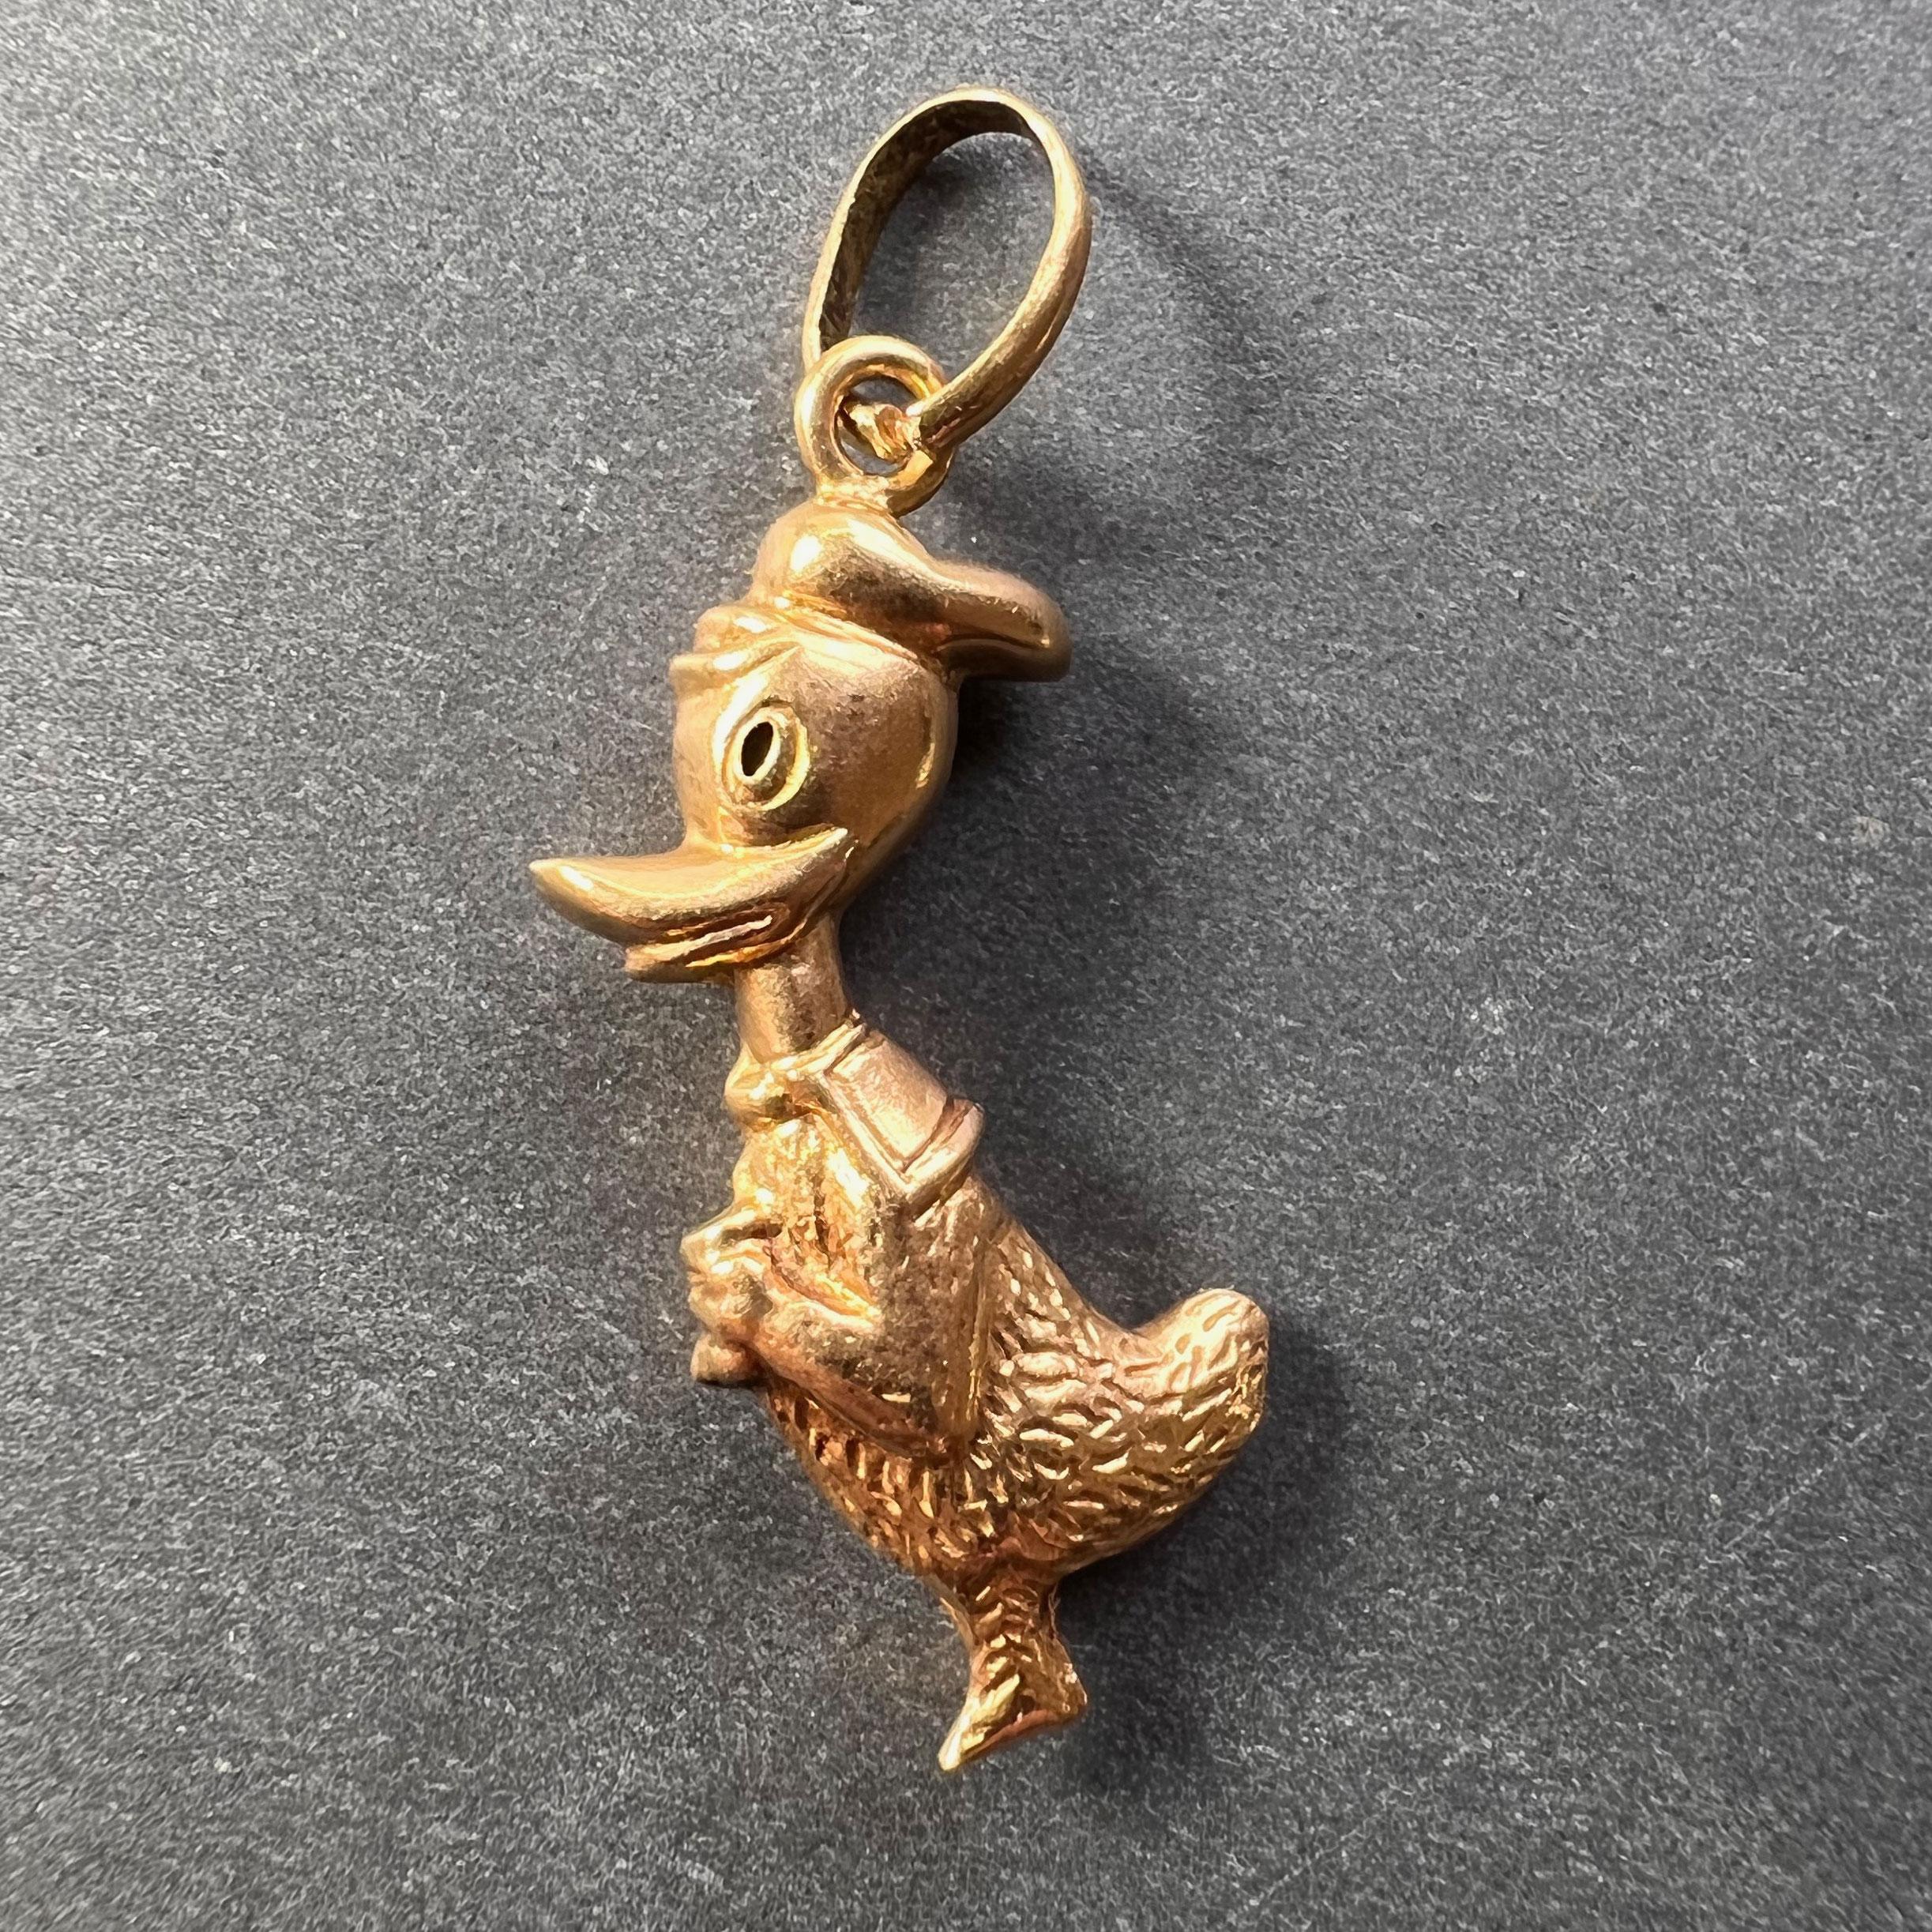 An 18 karat (18K) yellow gold charm pendant designed as a cartoon character of a duck. Stamped 750 for 18 karat gold and 14VR for Italian manufacture to the reverse.

Dimensions: 2.6 x 1.4 x 0.45 cm (not including jump ring)
Weight: 1.30 grams